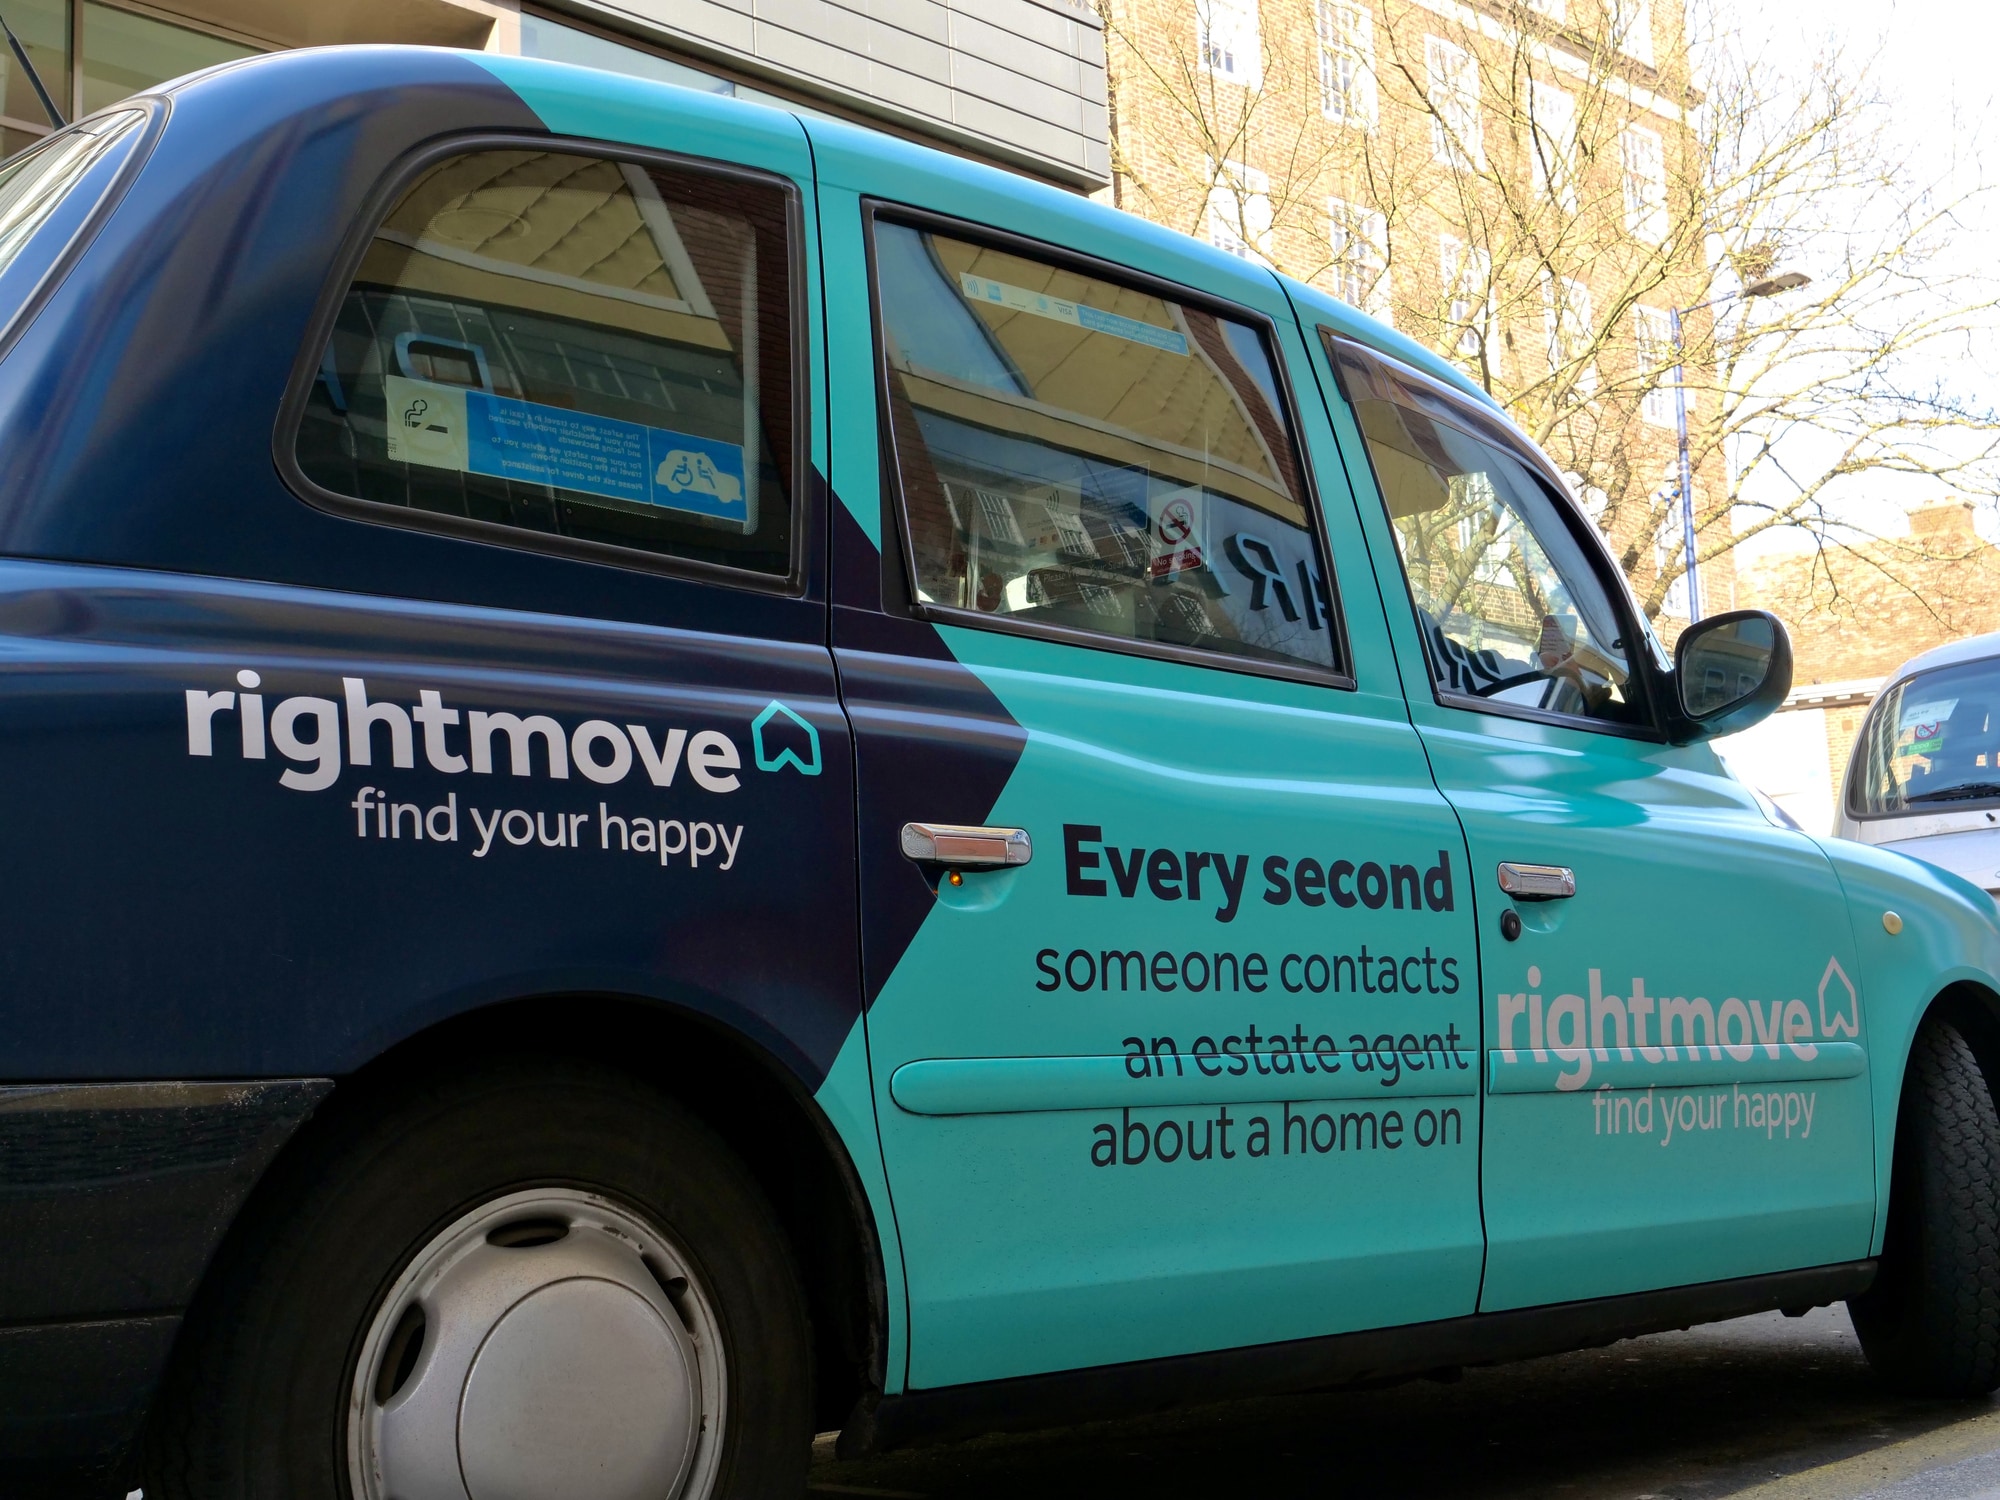 A london taxi with Rightmove advert on the side